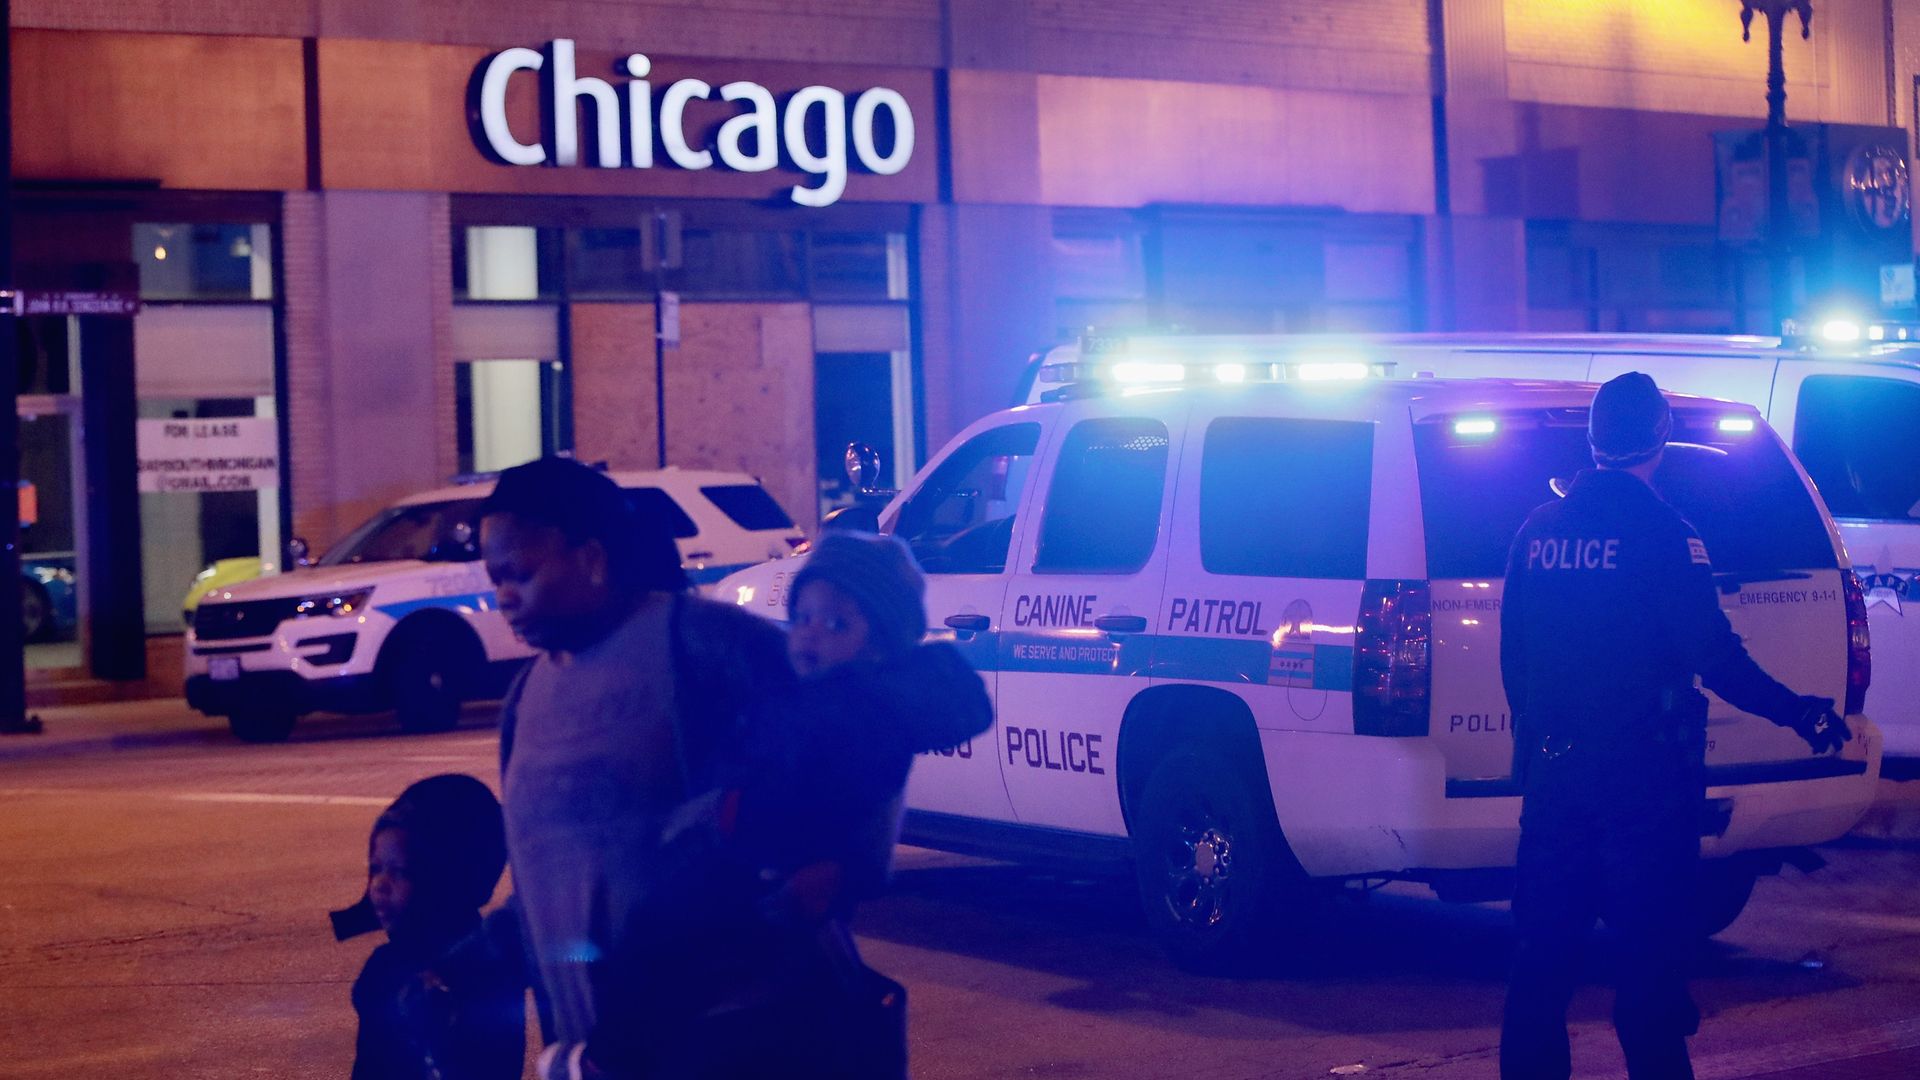 Police secure the scene near Mercy Hospital after a gunman opened fire on November 19, 2018 in Chicago, Illinois